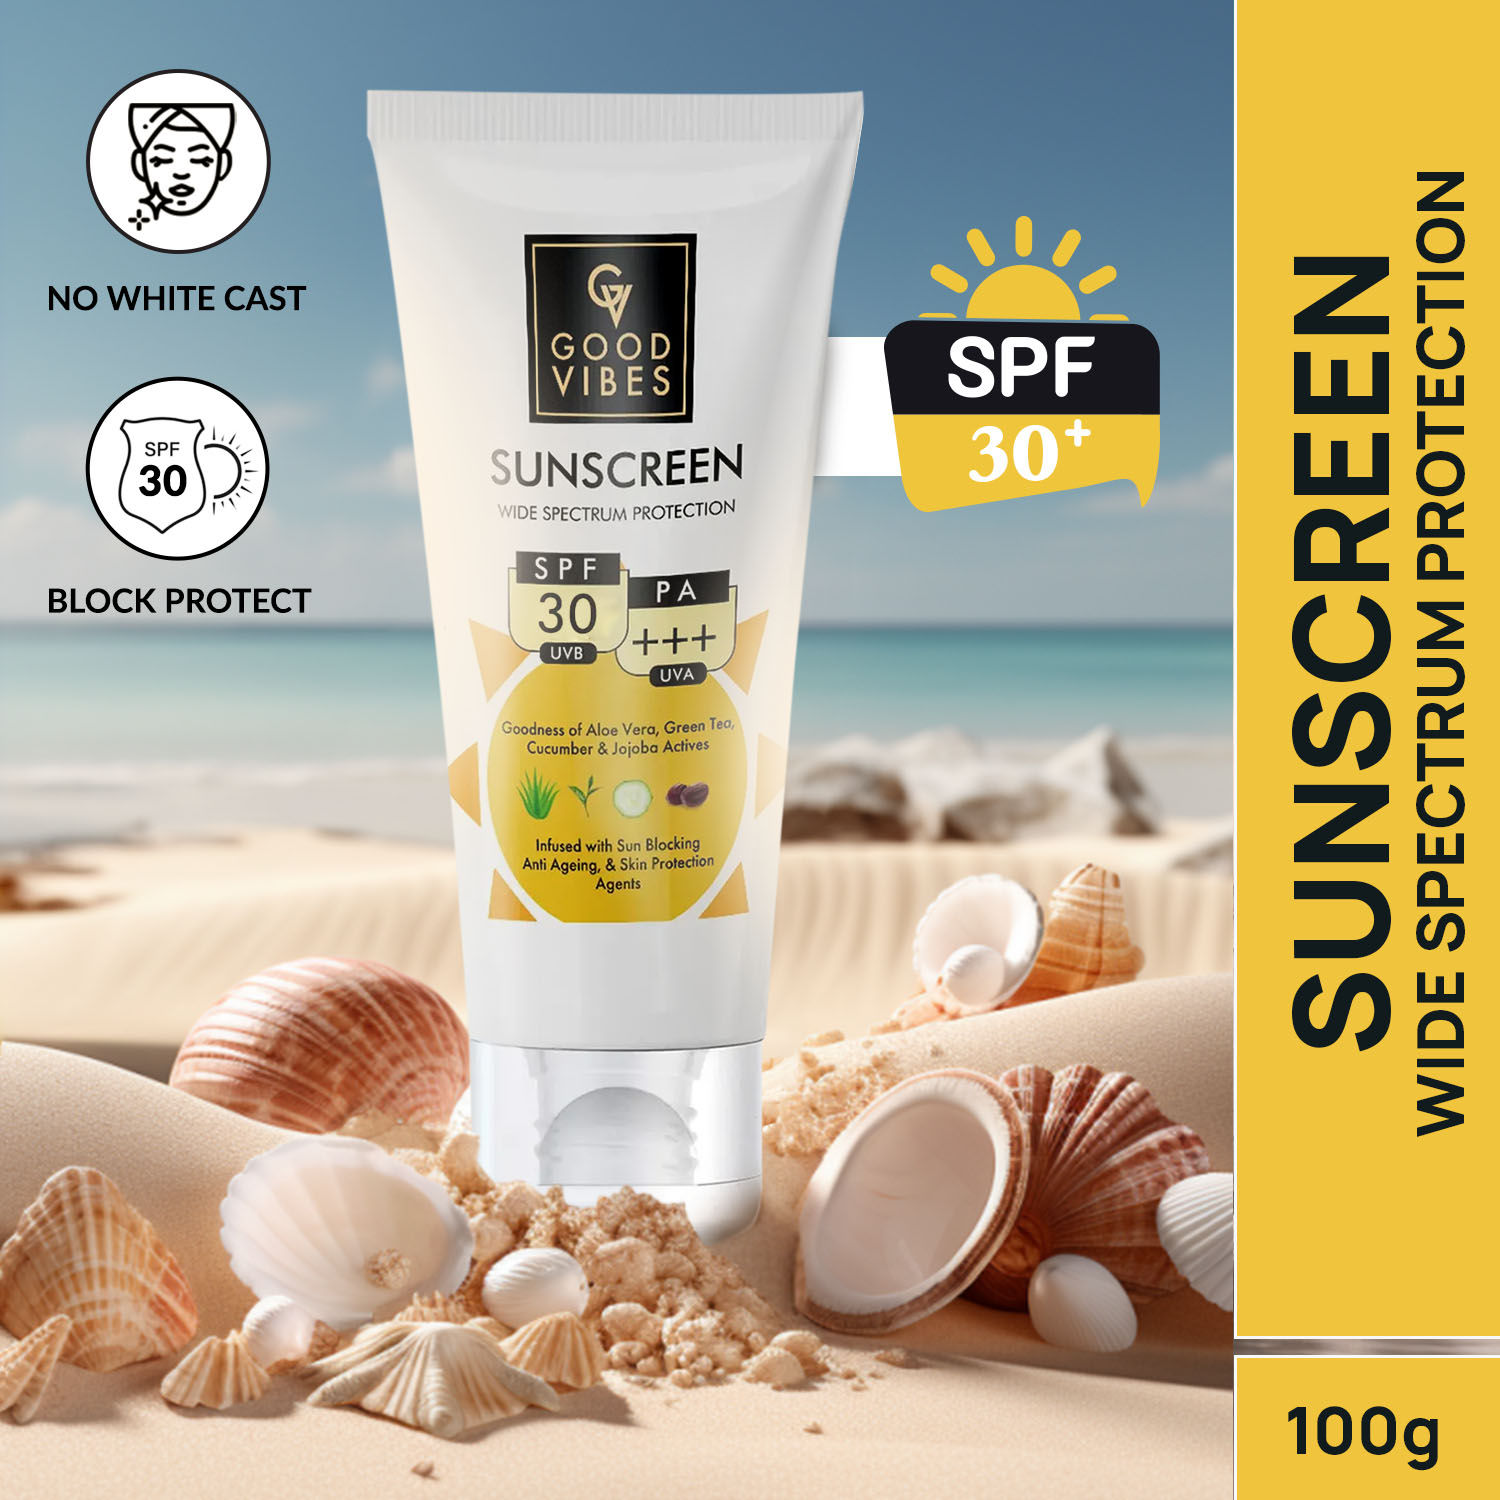 Buy Good Vibes Wide Spectrum Protection Sunscreen with SPF 30 | Non-Greasy, Anti-Ageing | With Aloe Vera | No Parabens, No Animal Testing (100 g) - Purplle